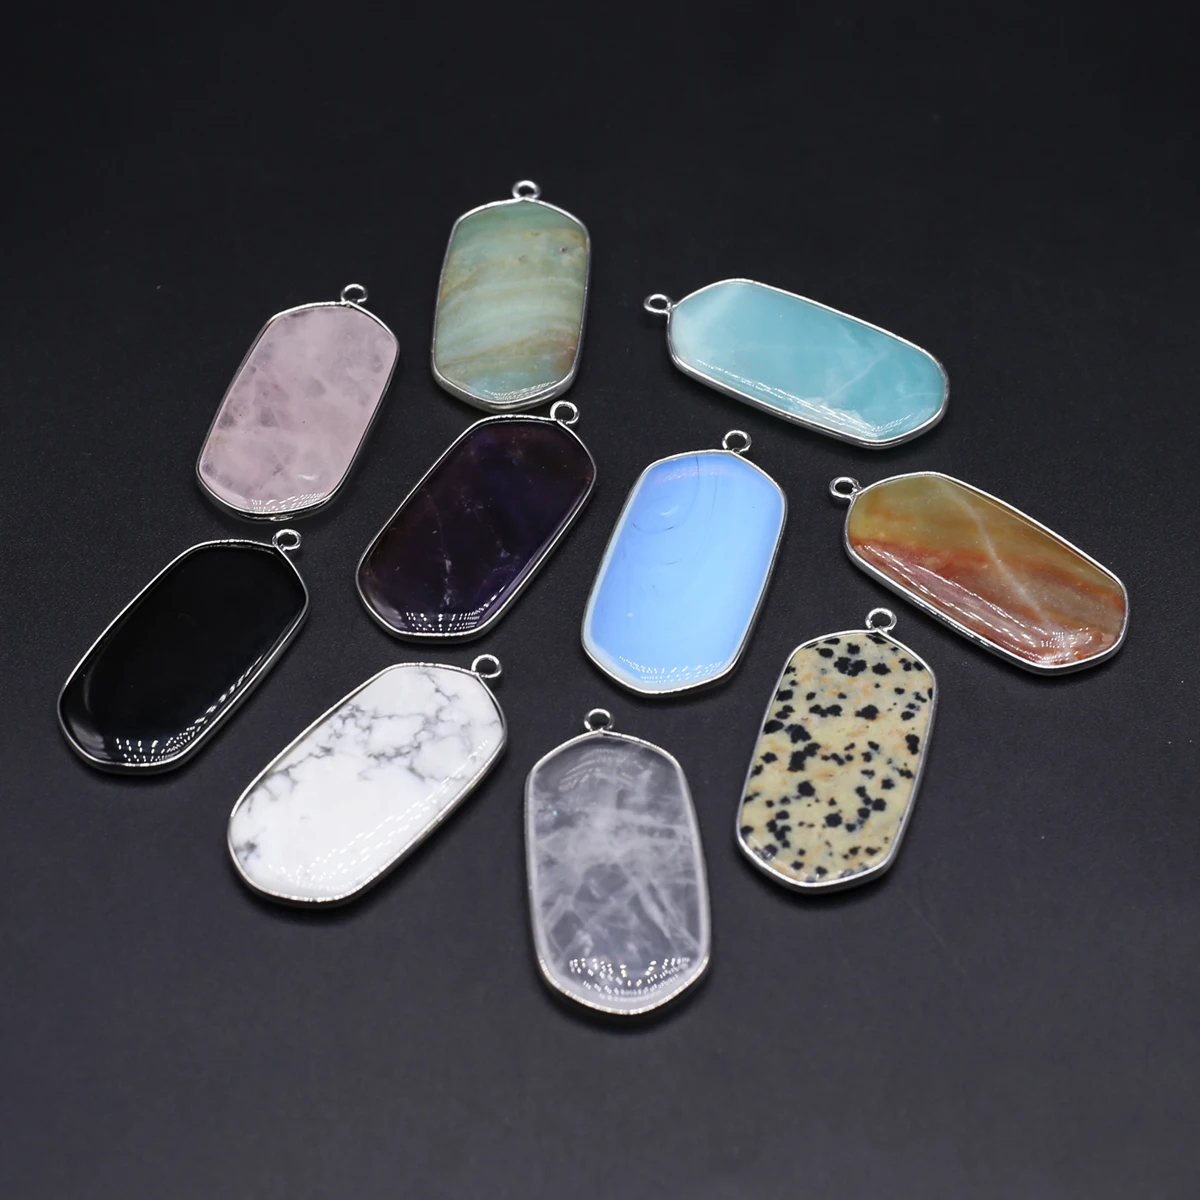 

Natural Stone Pendant Hexagon Quartz Opal Amazonite Silver Edging Healing Crystals Stone Charms For Jewelry Making DIY Necklace